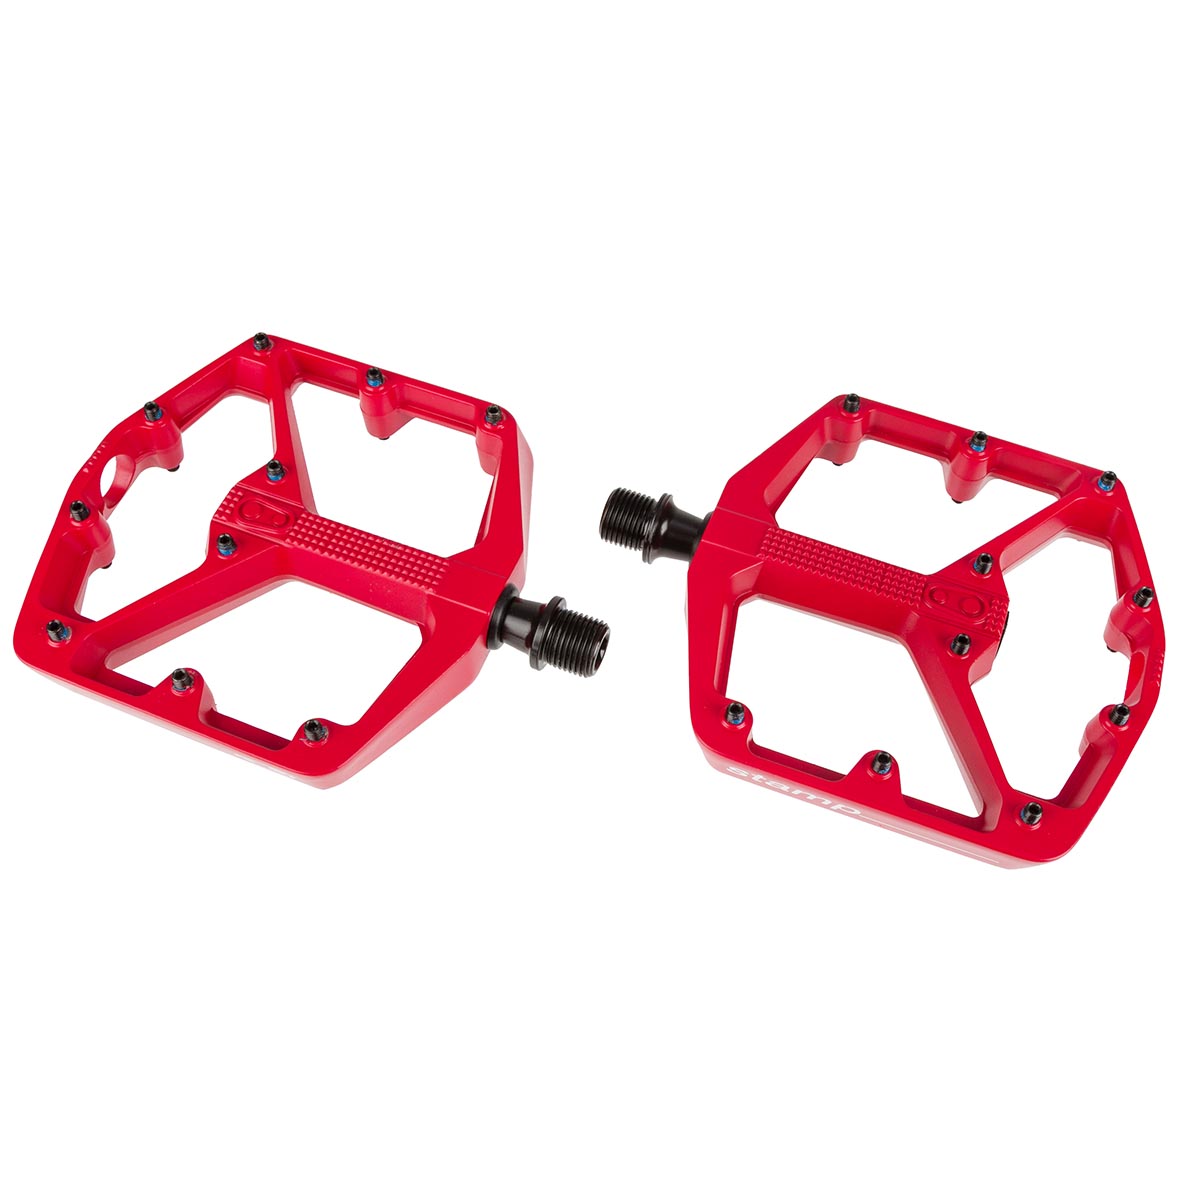 Crankbrothers Pedali Stamp 2 2019 Red, Large